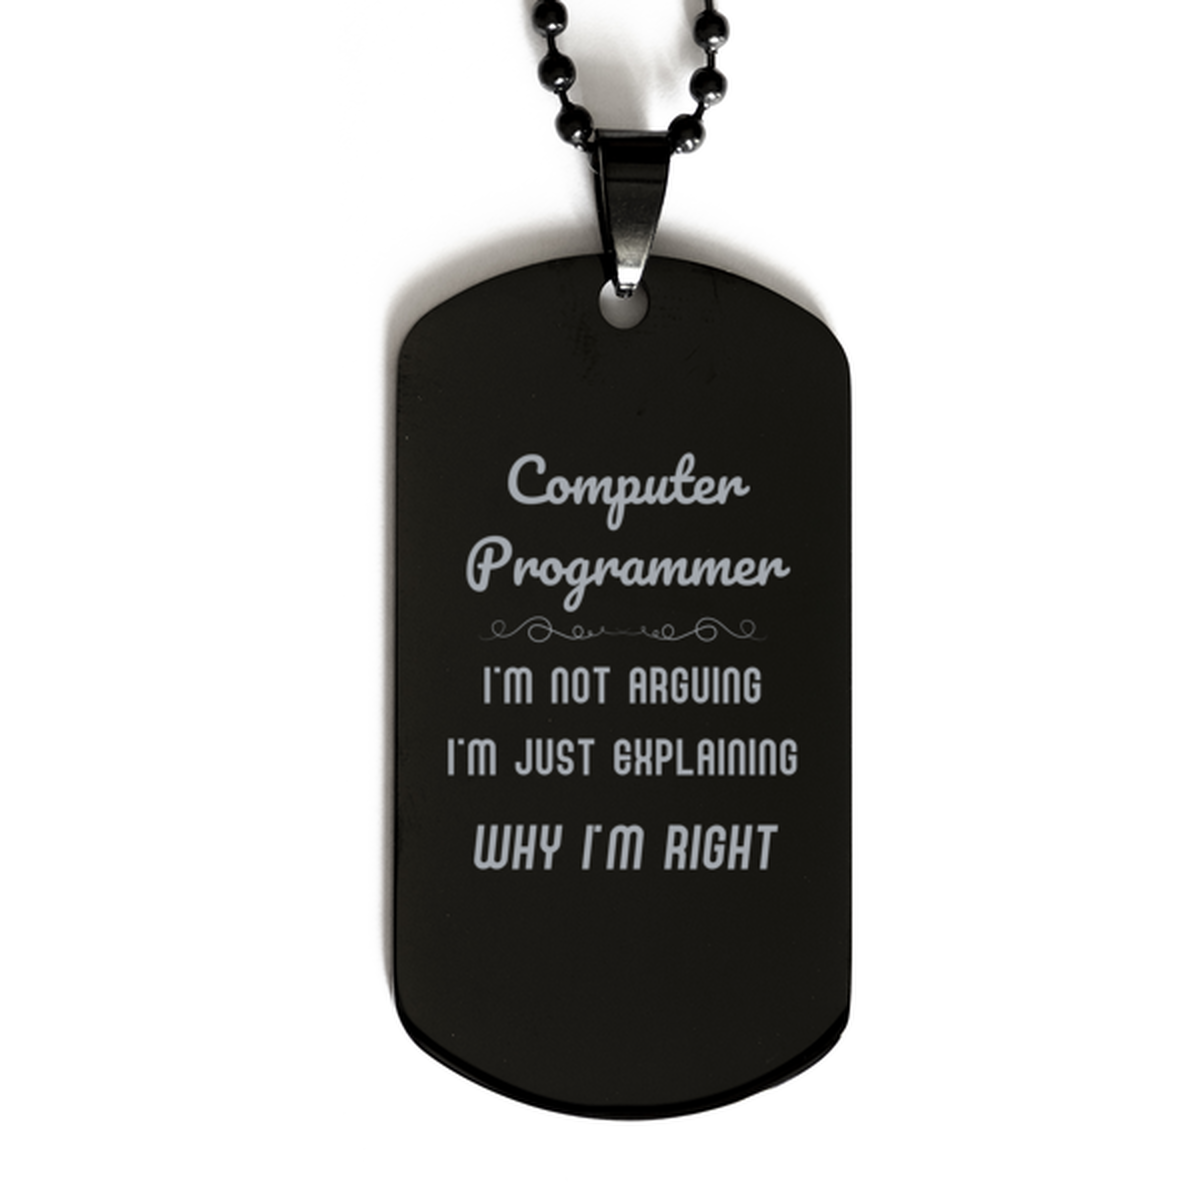 Computer Programmer I'm not Arguing. I'm Just Explaining Why I'm RIGHT Black Dog Tag, Funny Saying Quote Computer Programmer Gifts For Computer Programmer Graduation Birthday Christmas Gifts for Men Women Coworker